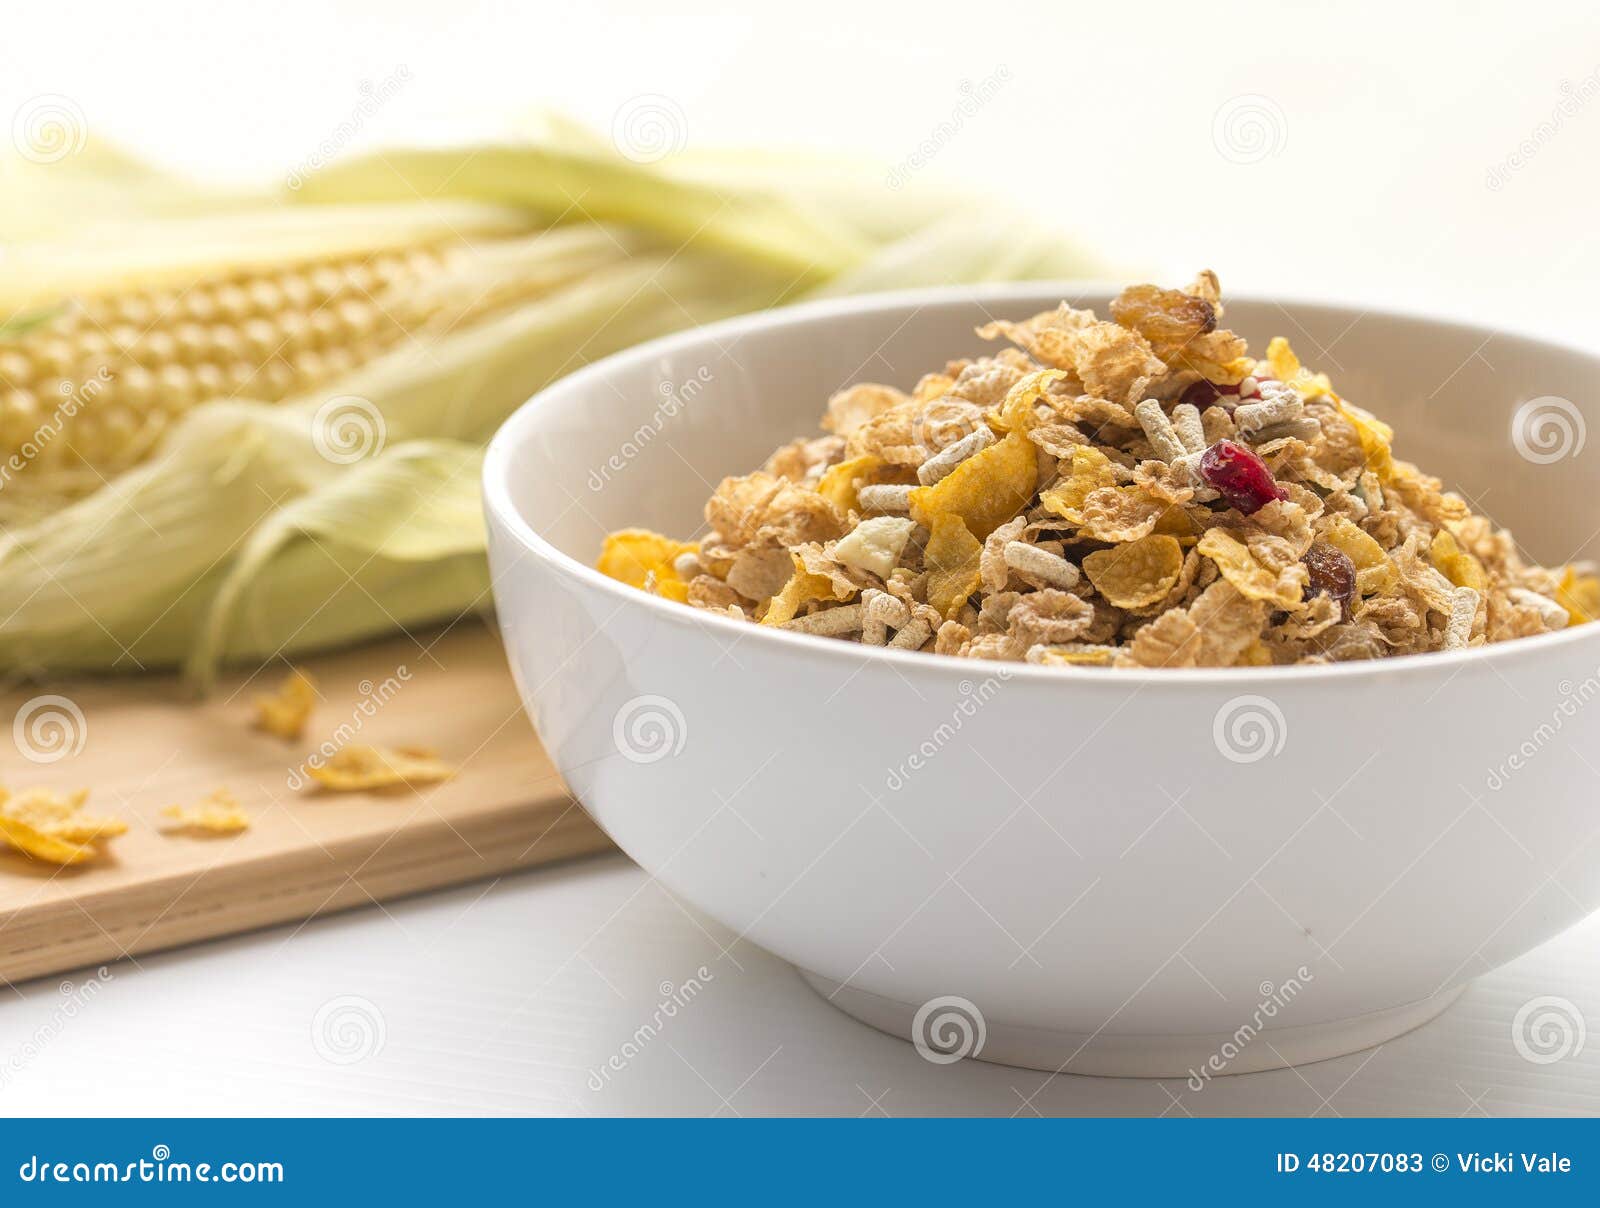 Bowl Of Breakfast Cereal And Corn Cob. Stock Photo - Image: 48207083